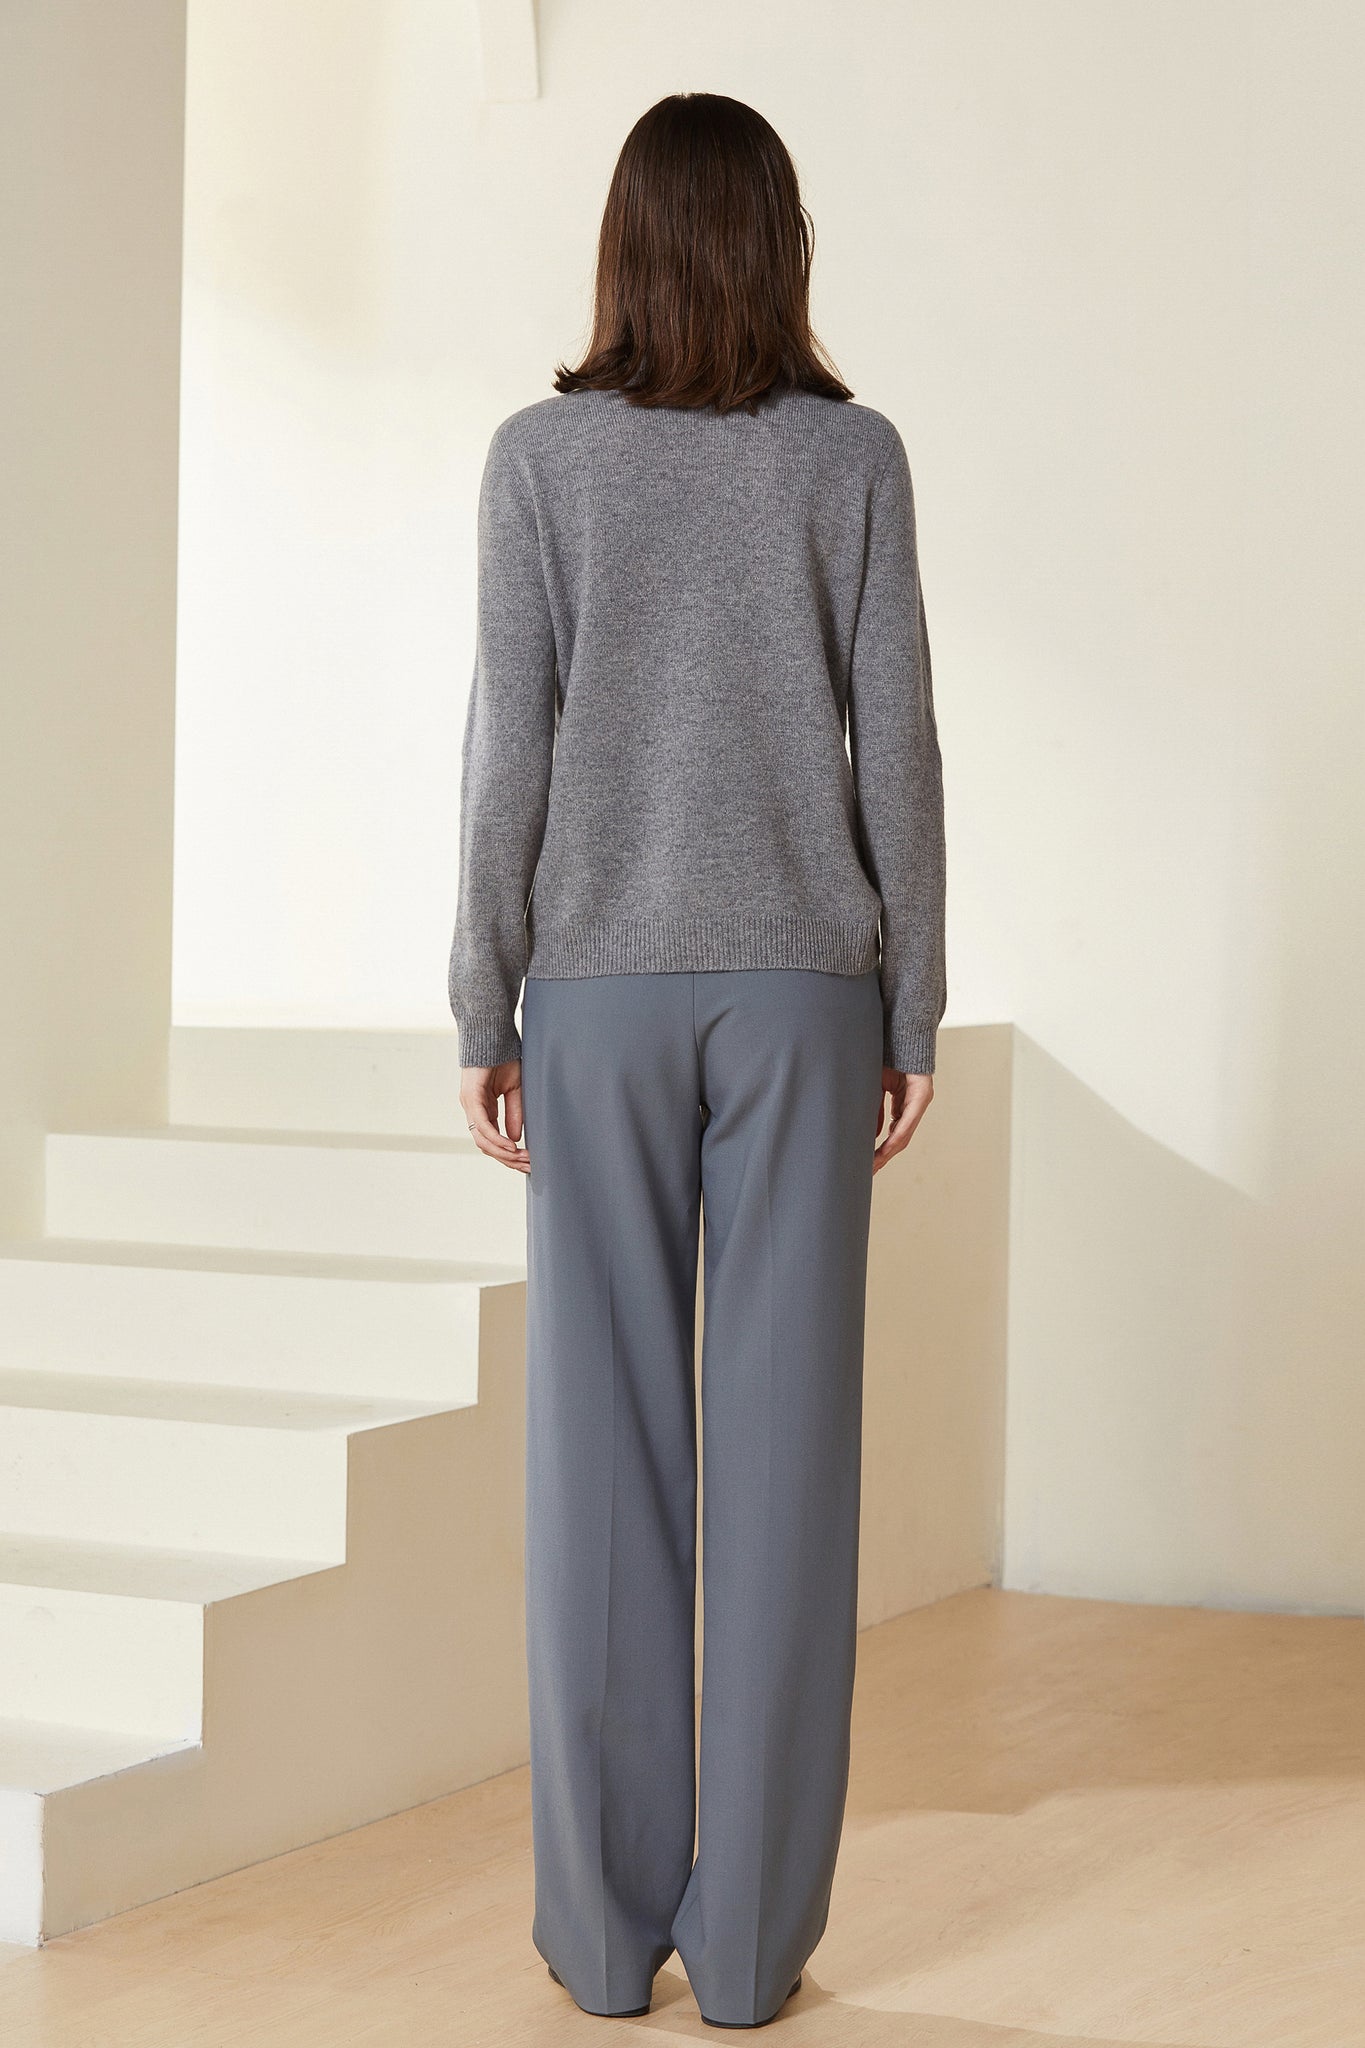 Sylphide | Maia Gray Rollneck Wool Sweater